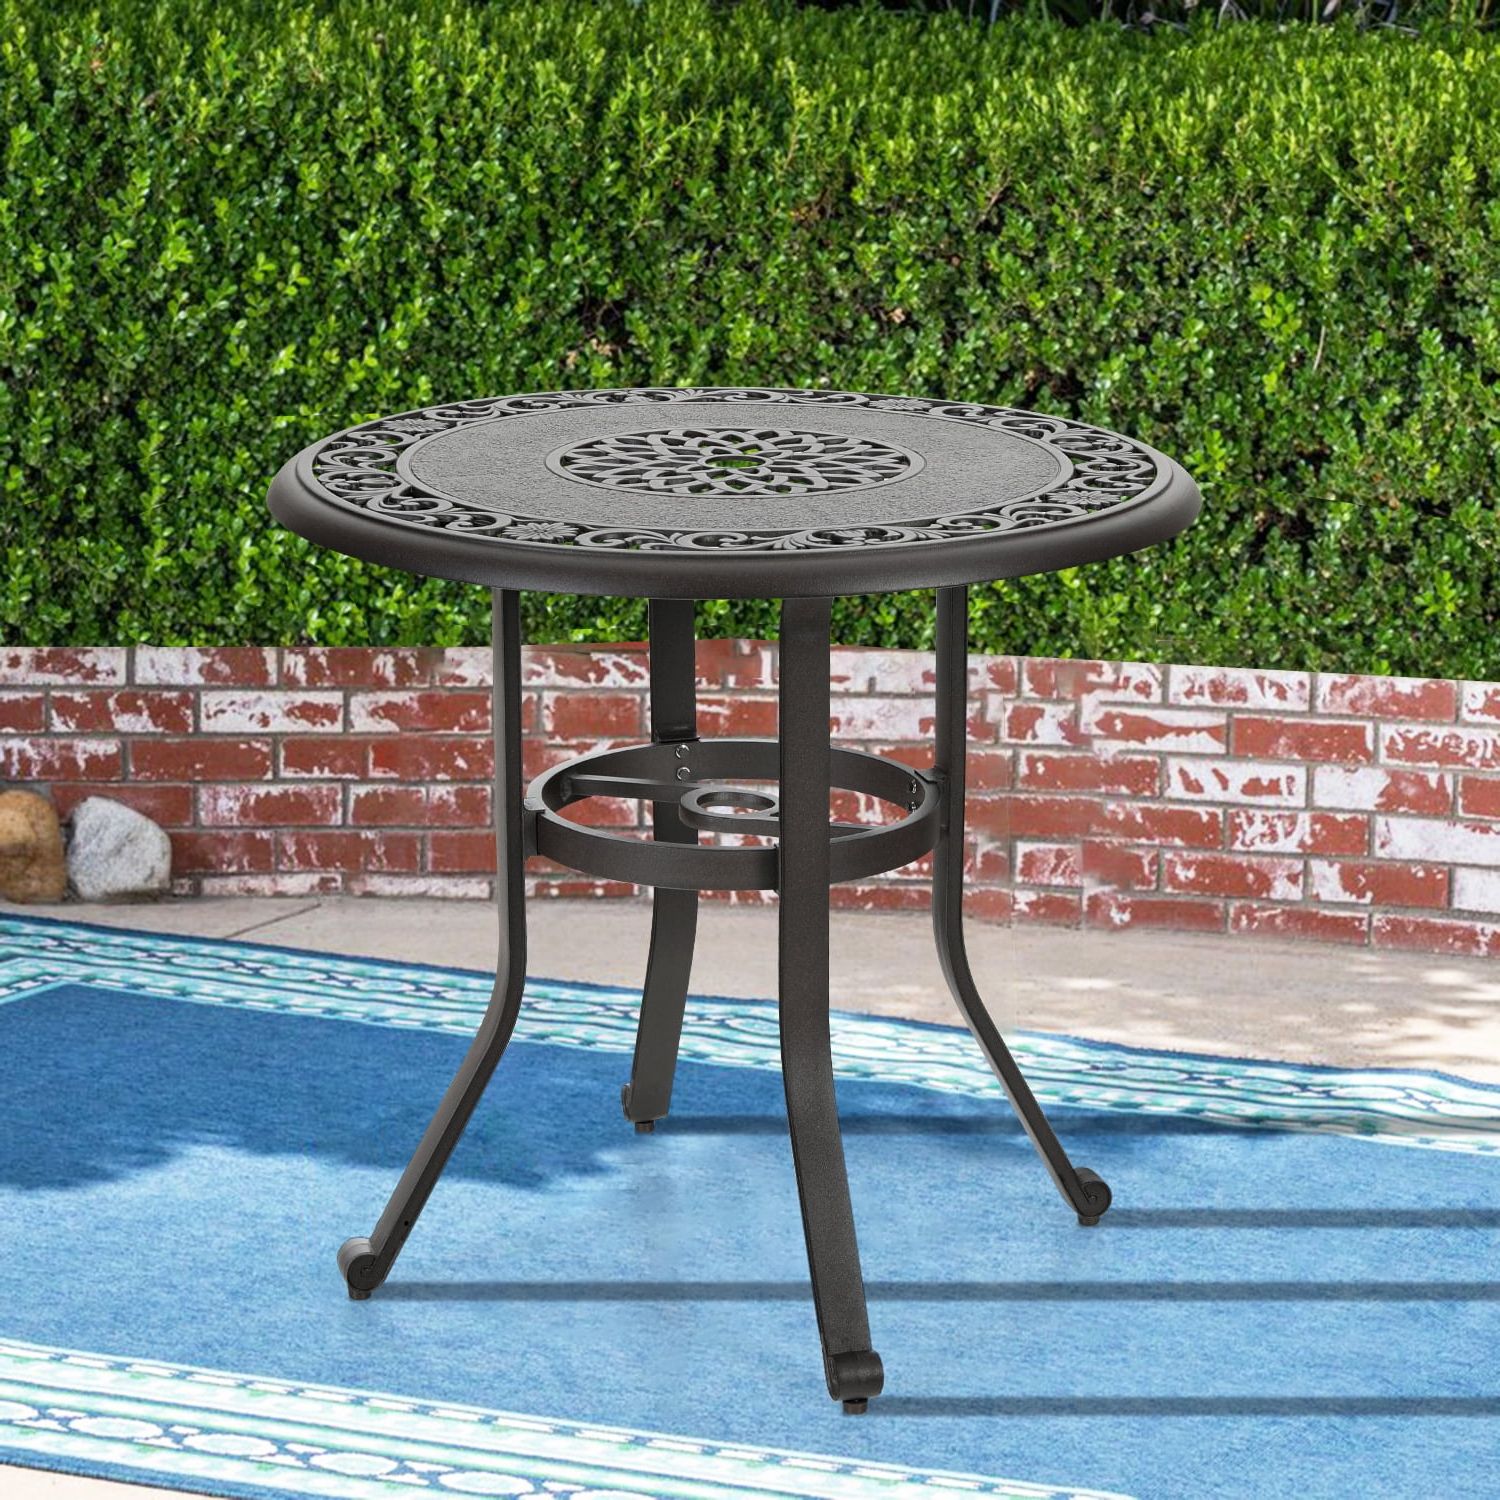 Mf Studio 32" Cast Aluminum Patio Outdoor Bistro Table, Round Dining Pertaining To Outdoor Half Round Coffee Tables (View 12 of 20)